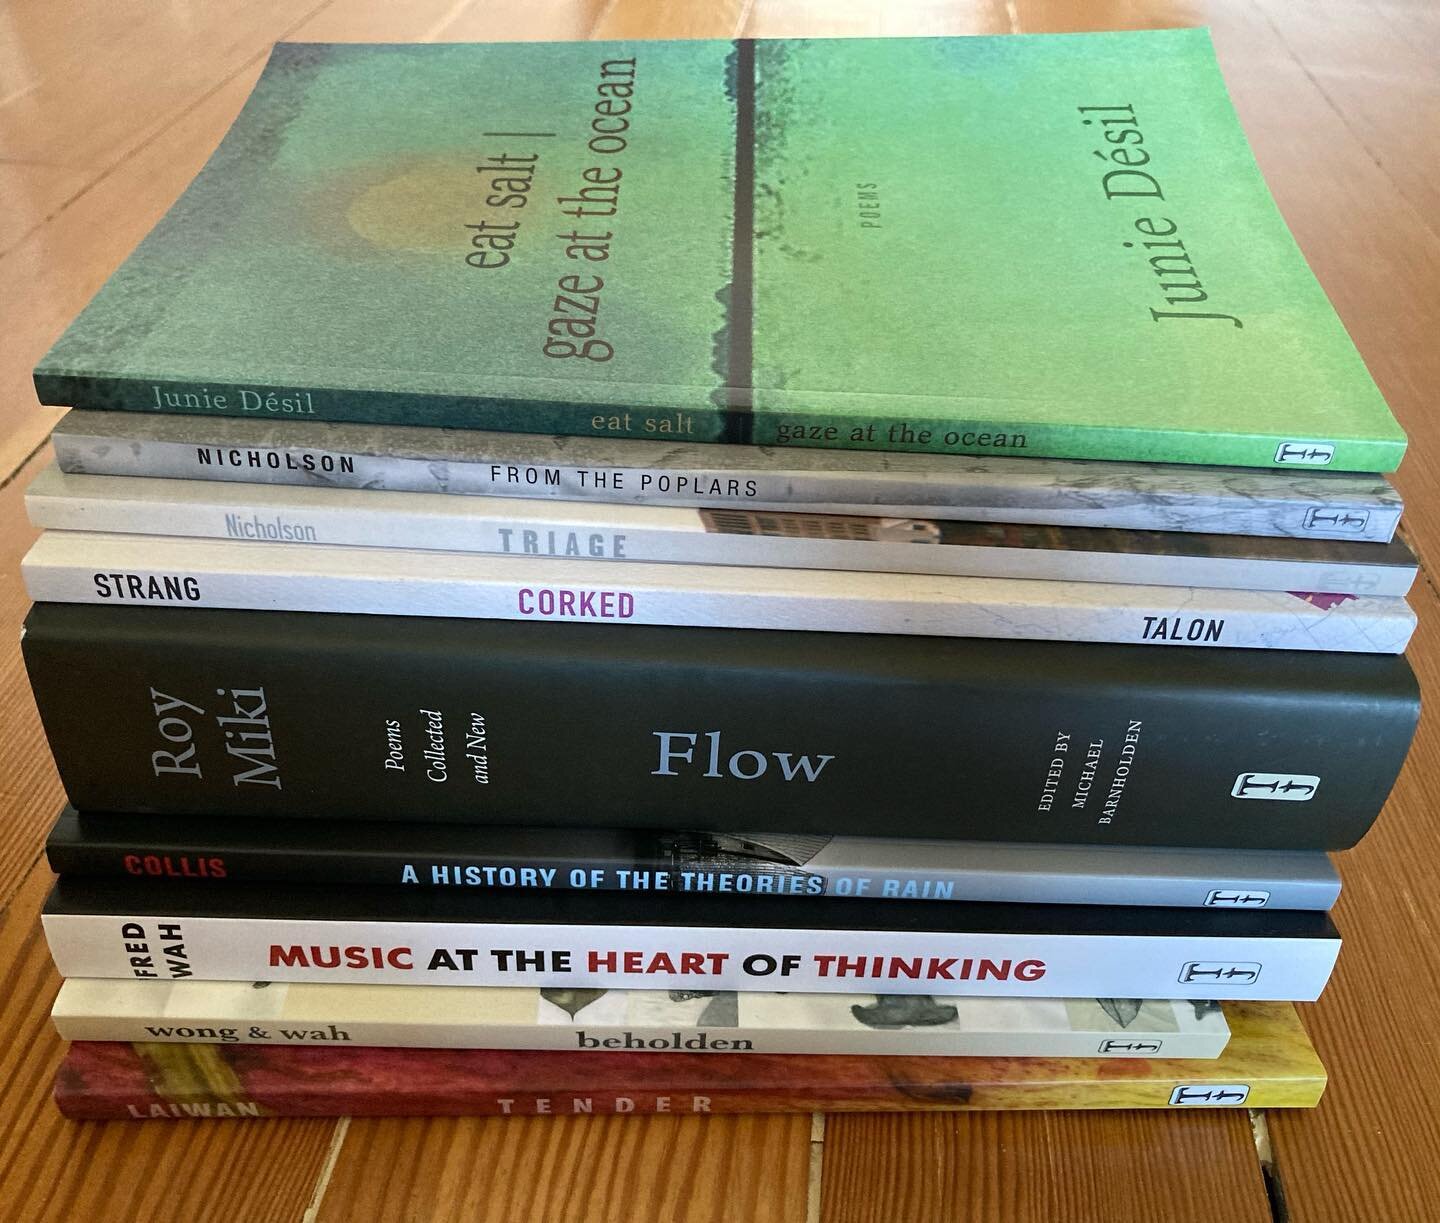 Don&rsquo;t fret about holiday gifts and supply chain myths, excellent local poetry will arrive swiftly to your door. Support your local publishers and you&rsquo;ll find many wonder filled gifts. 

Here&rsquo;s my readying for winter solstice reading